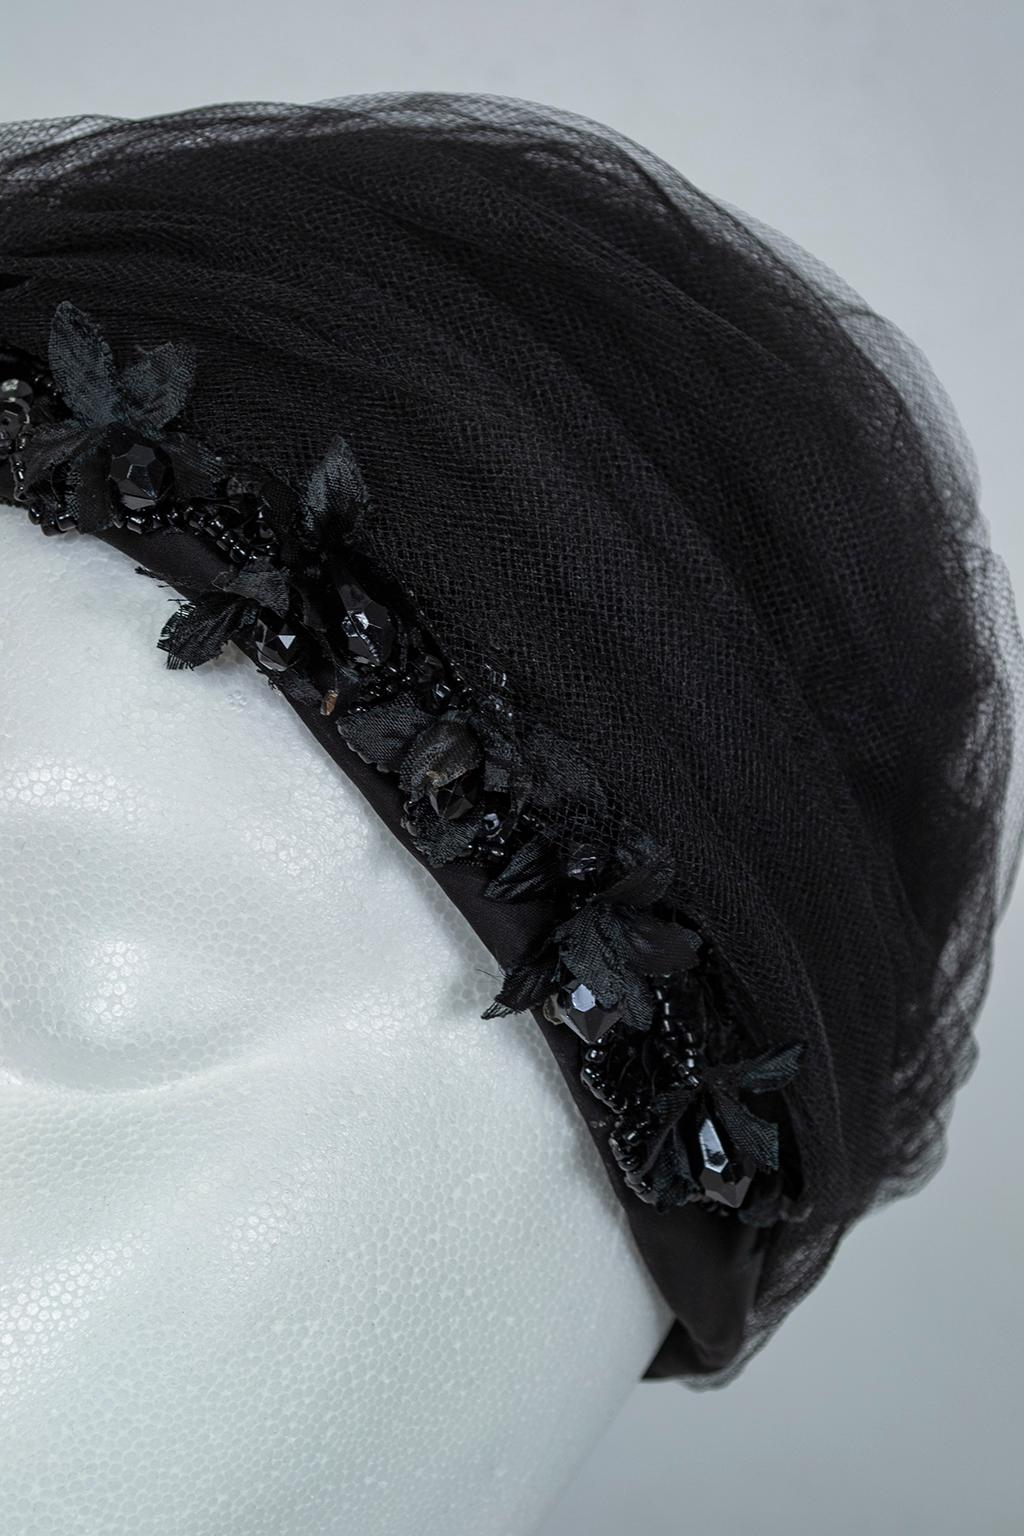 Women's Black Tulle Cocktail Turban Hat with Chandelier Bead Floral Trim - S, 1960s